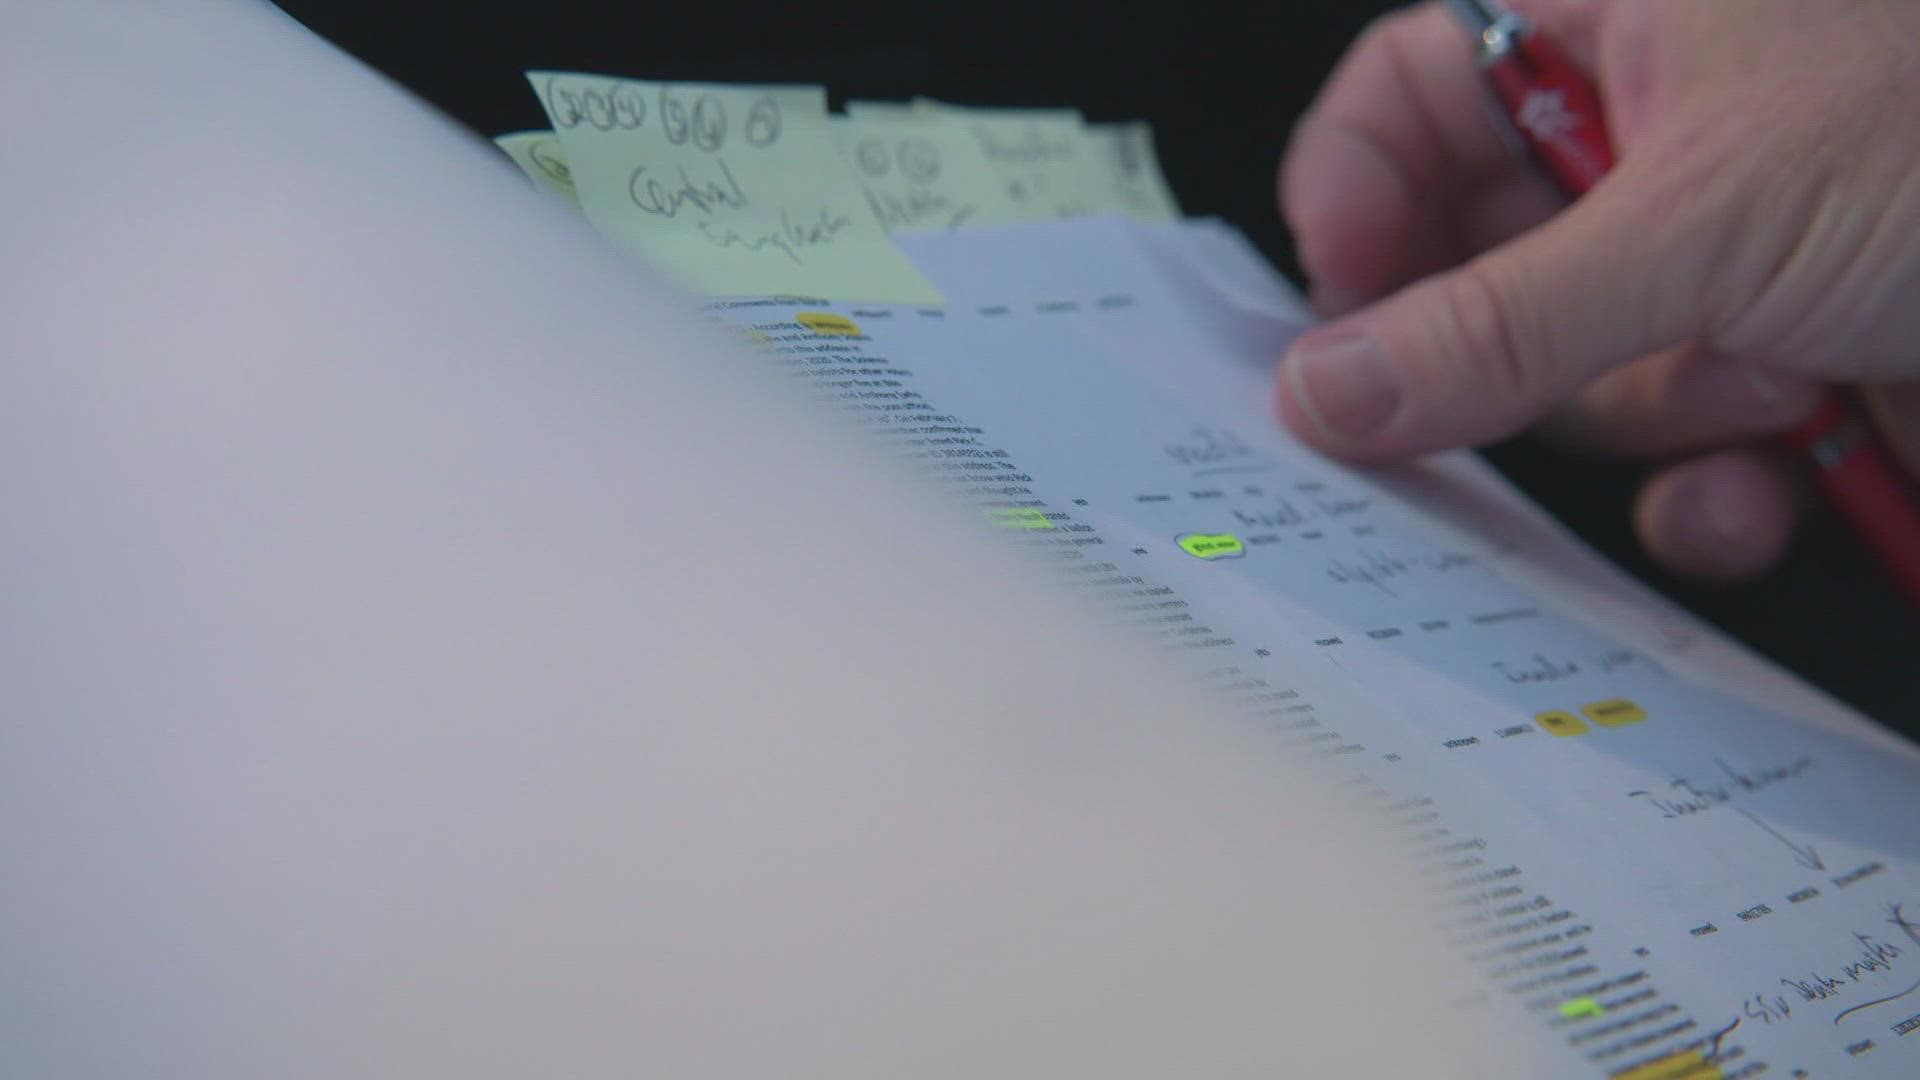 The Mason County Voter Research Project’s “Voter Anomaly” report is filled with inaccuracies, a KING 5 investigation found.